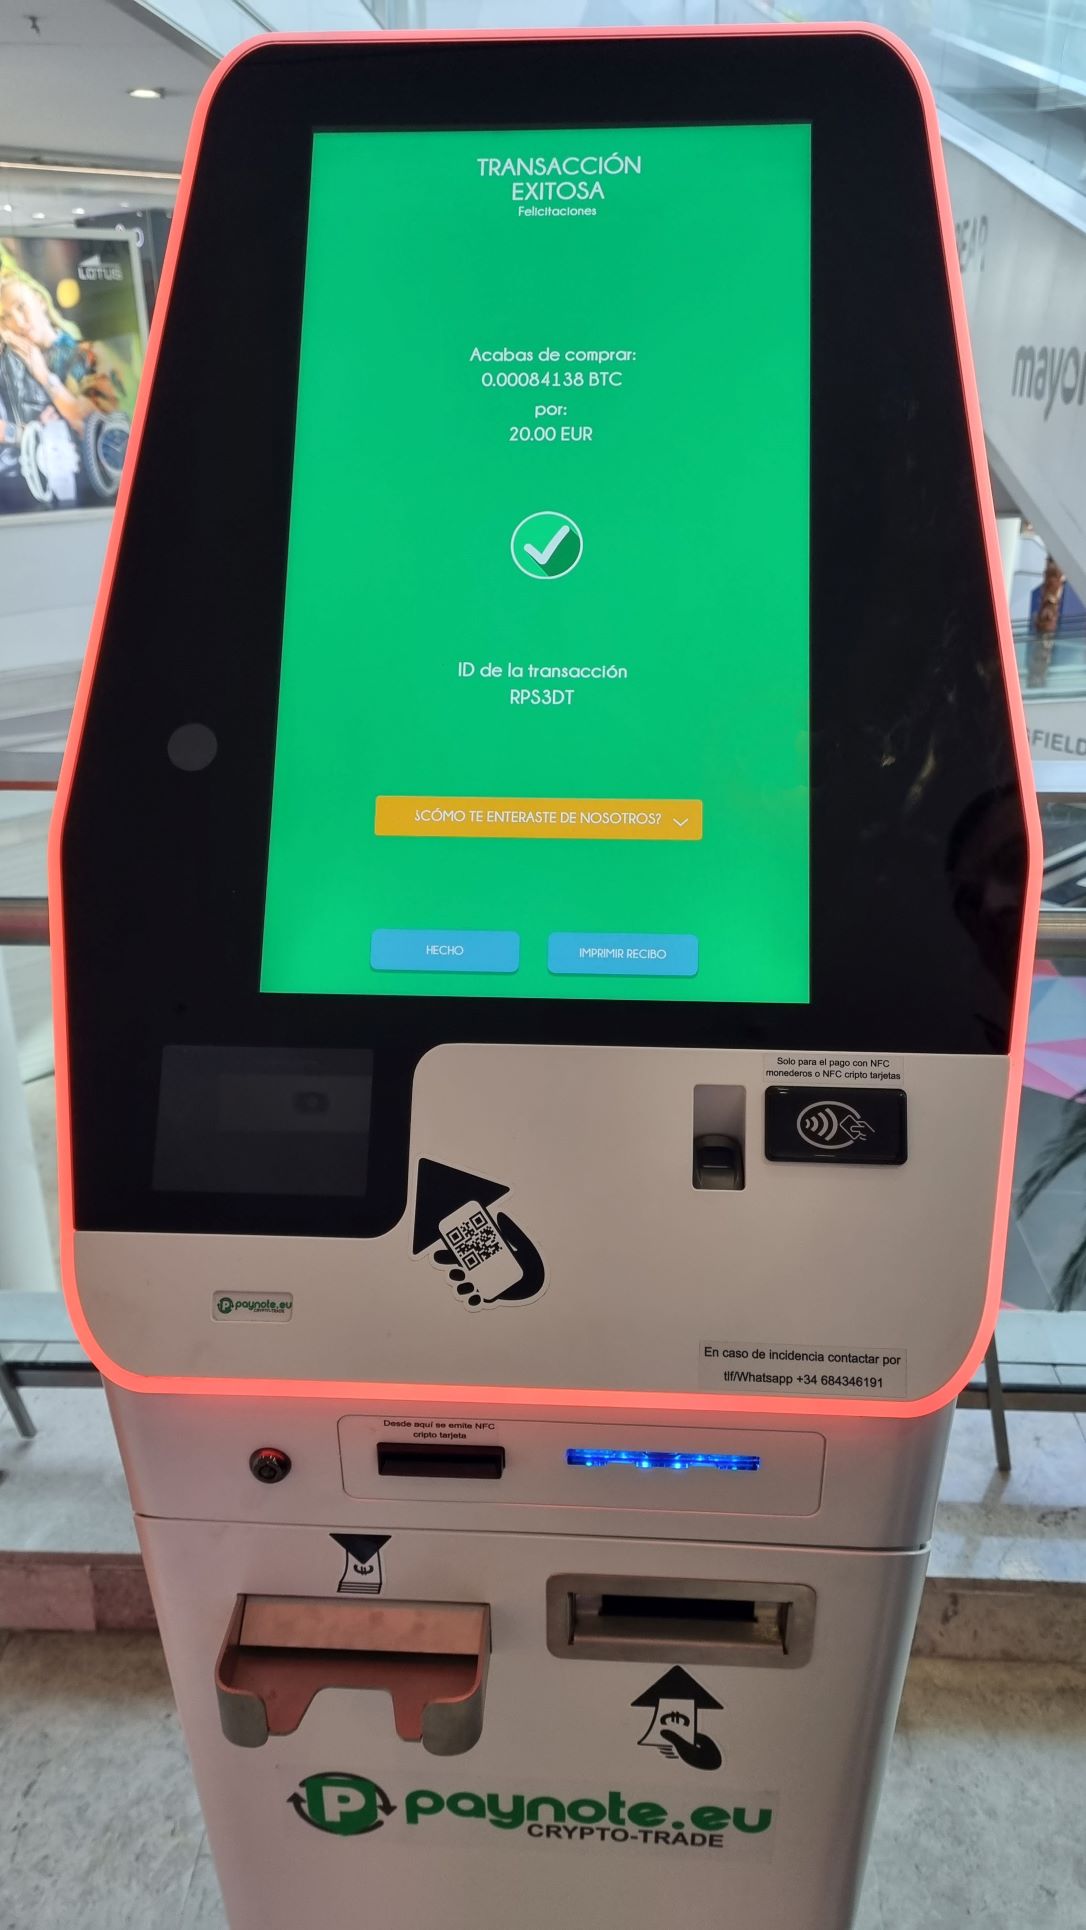 sale transaction completed at crypto ATM